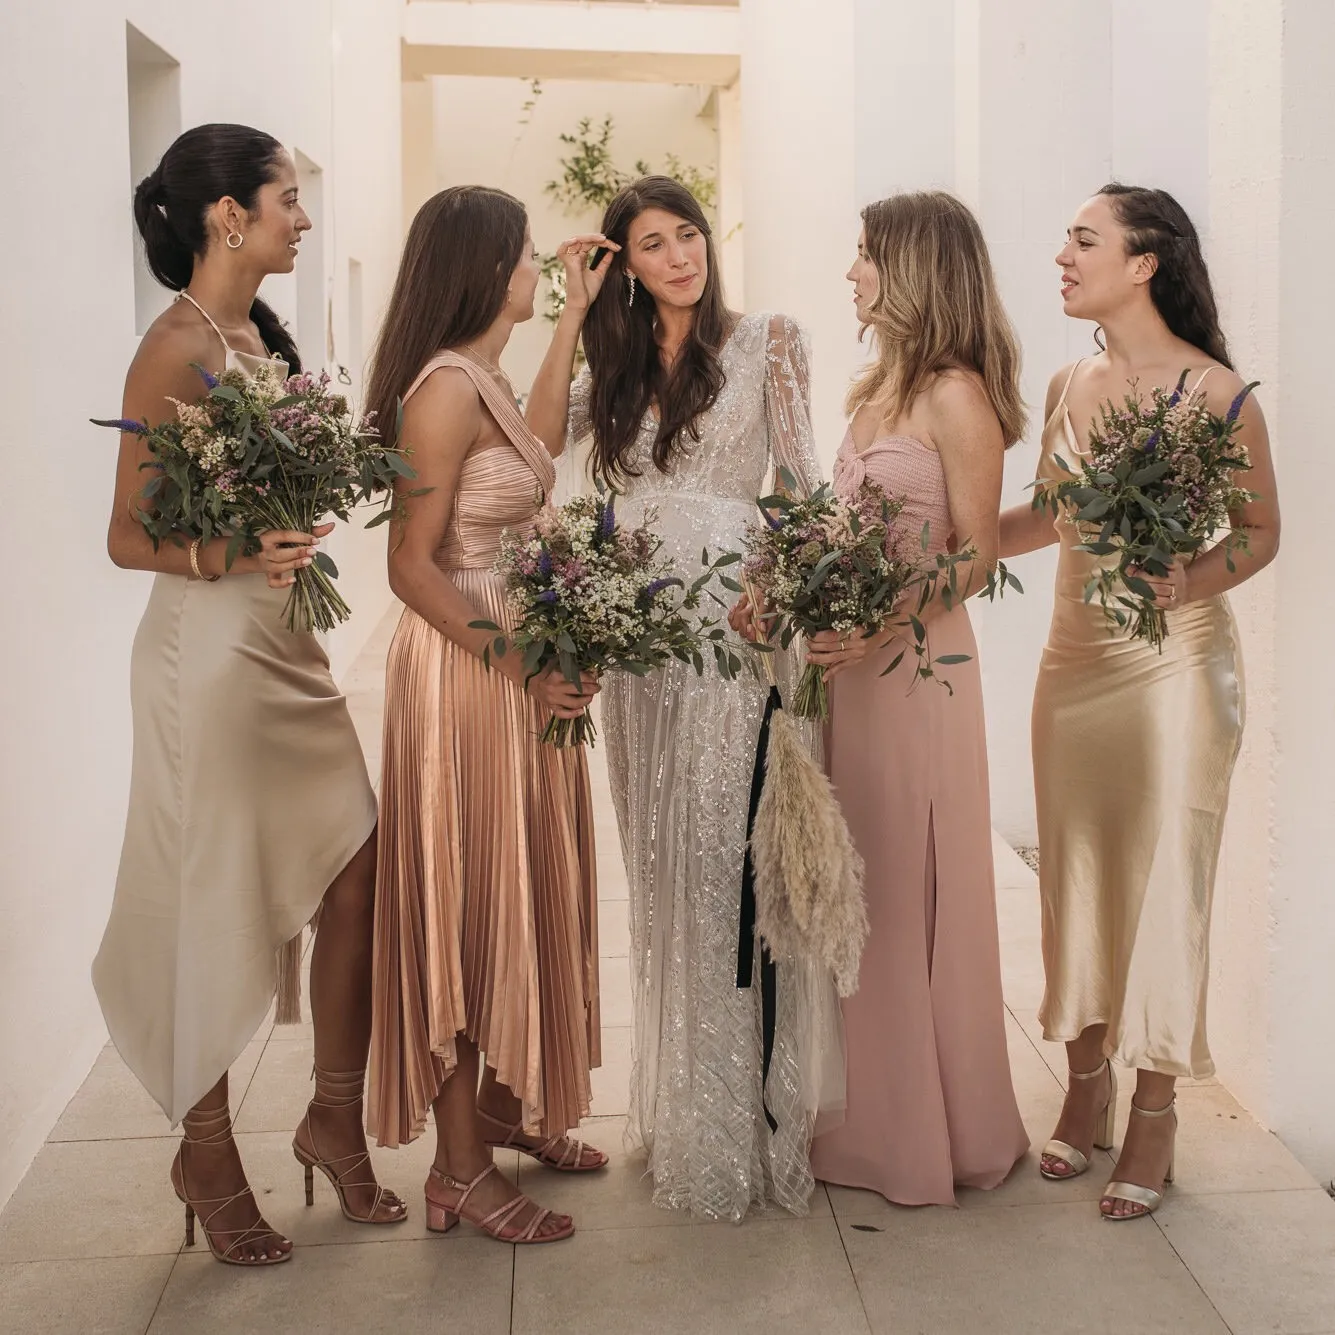 How Well Do You Know the Bride Game Mismatched blush bridesmaid dresses